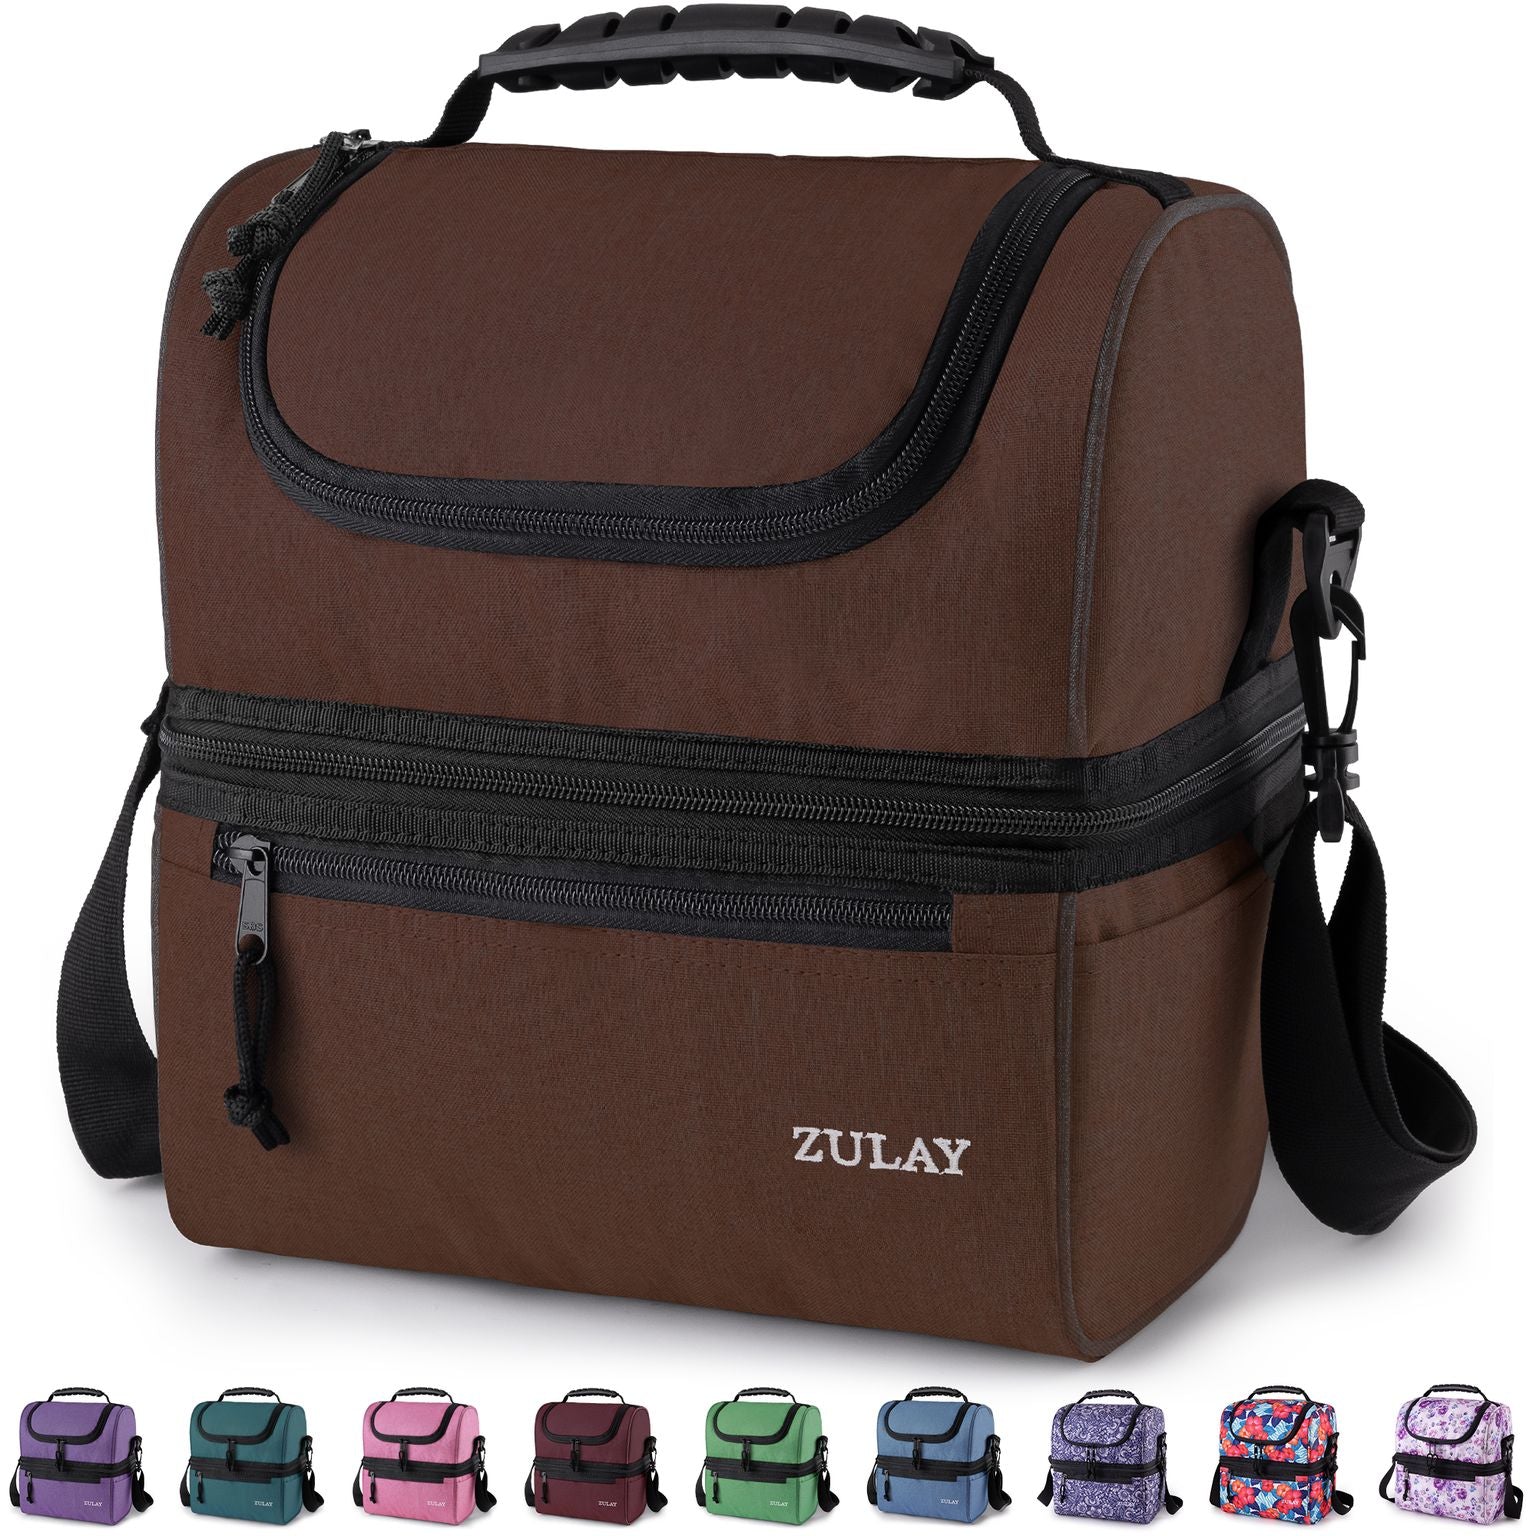 Zulay Kitchen Insulated 2-Compartment Lunch Box Bag With Strap - Caribbean  Blue, 1 - Food 4 Less